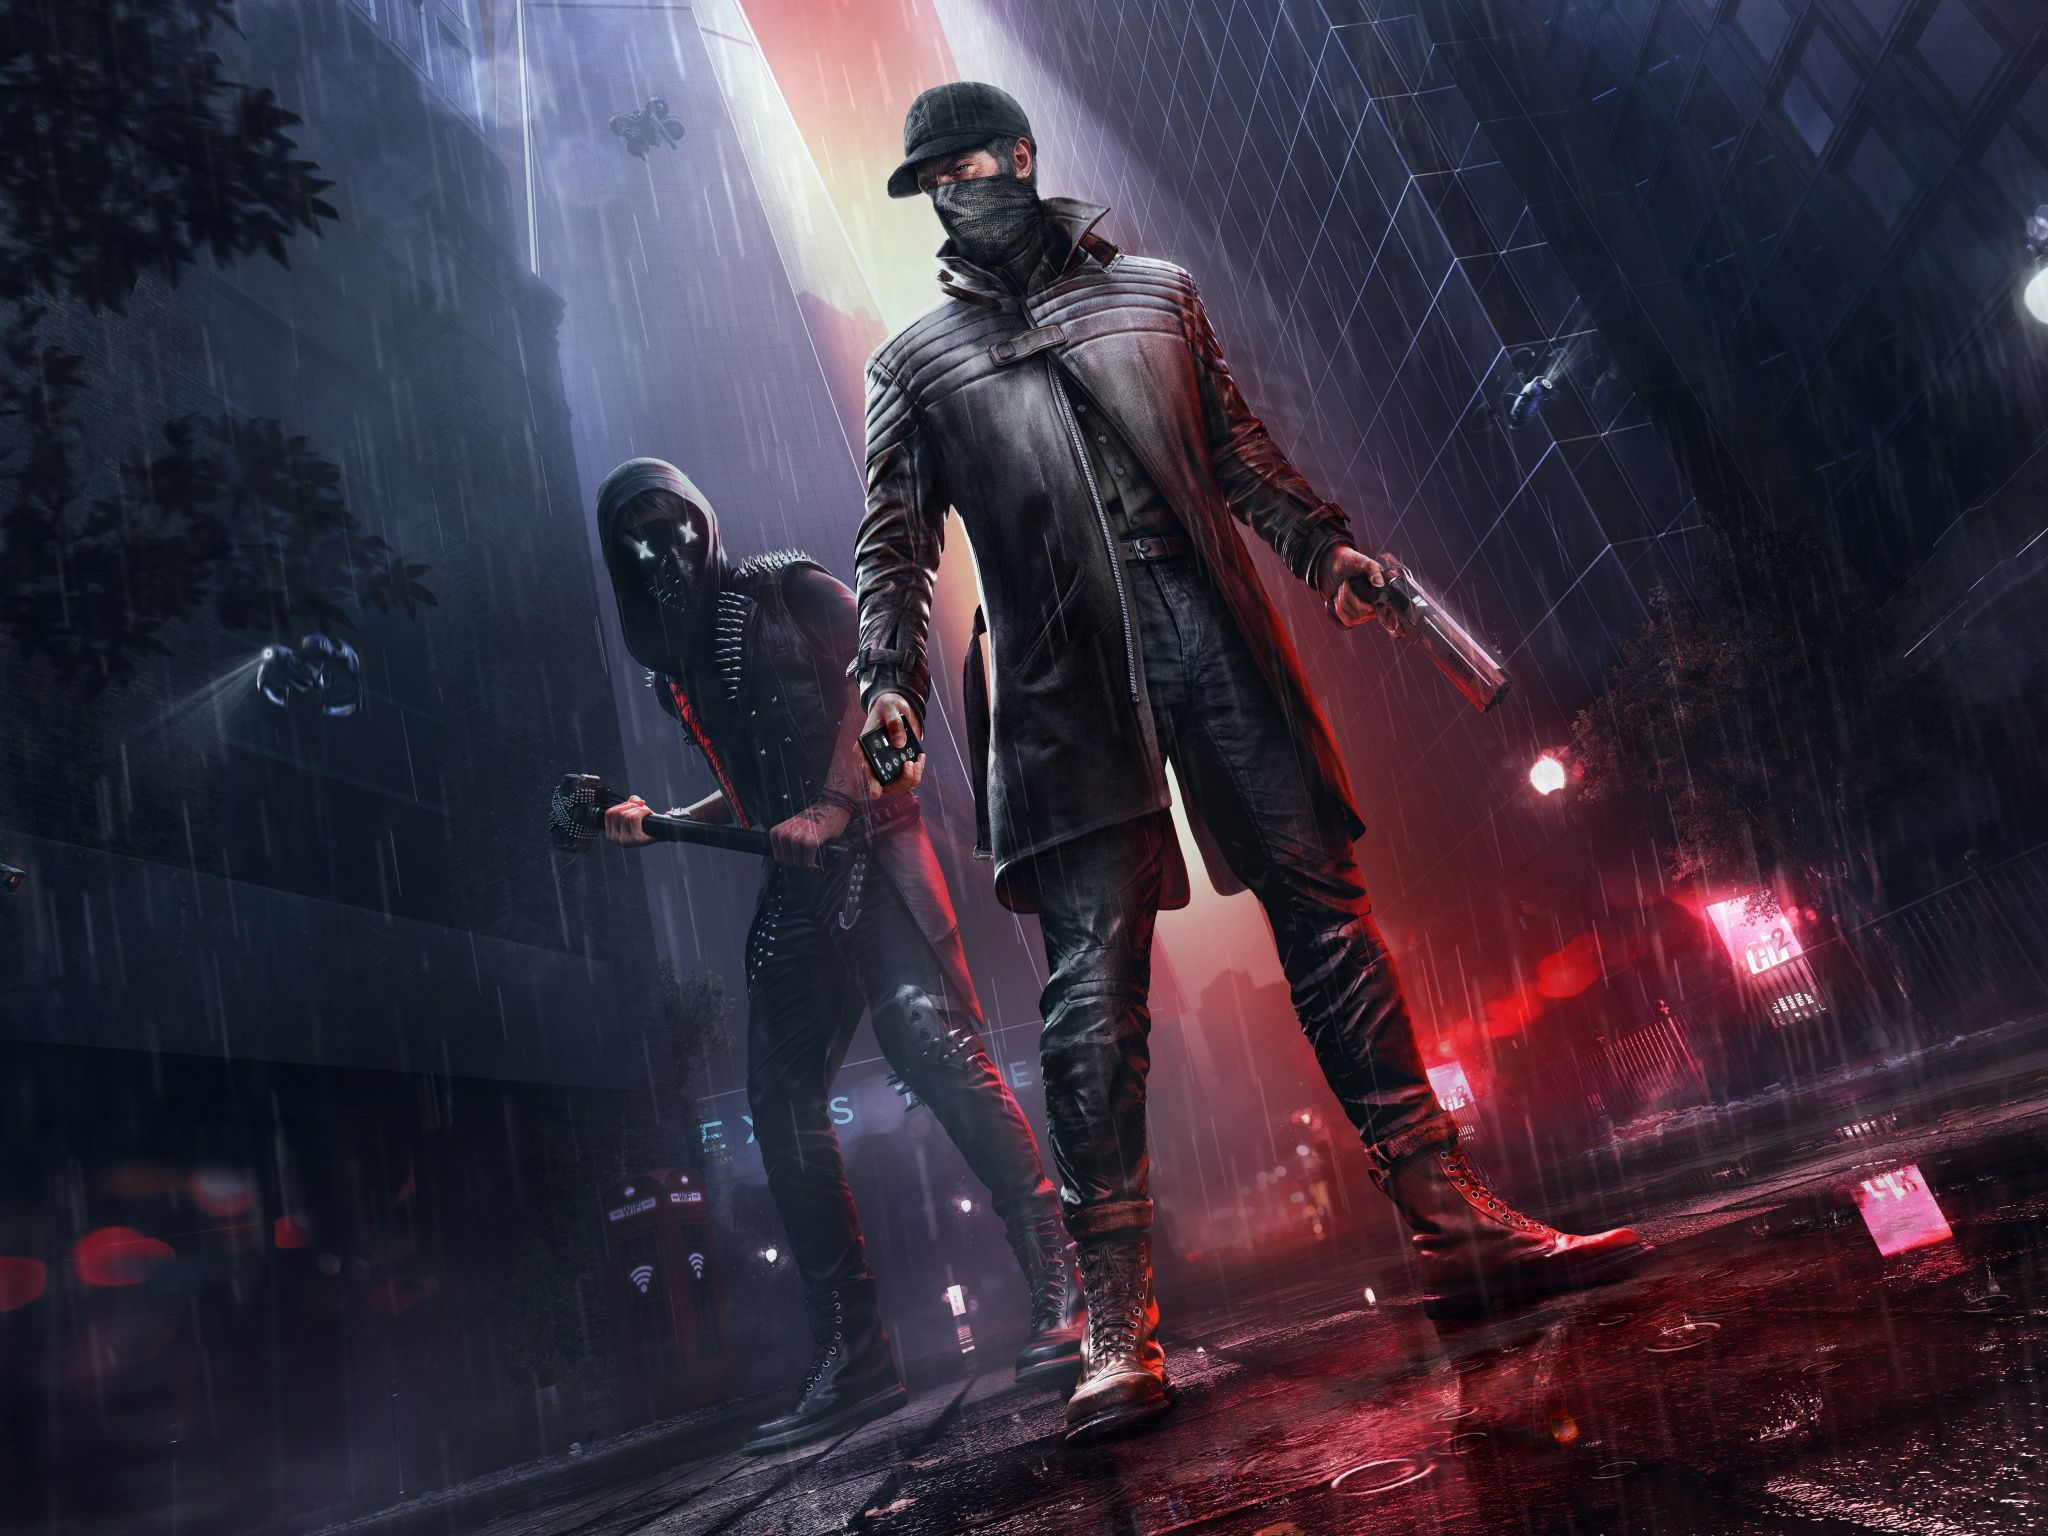 Watch Dogs: Legion Wallpaper 4K, Aiden Pearce, DedSec, PC Games, PlayStation Games